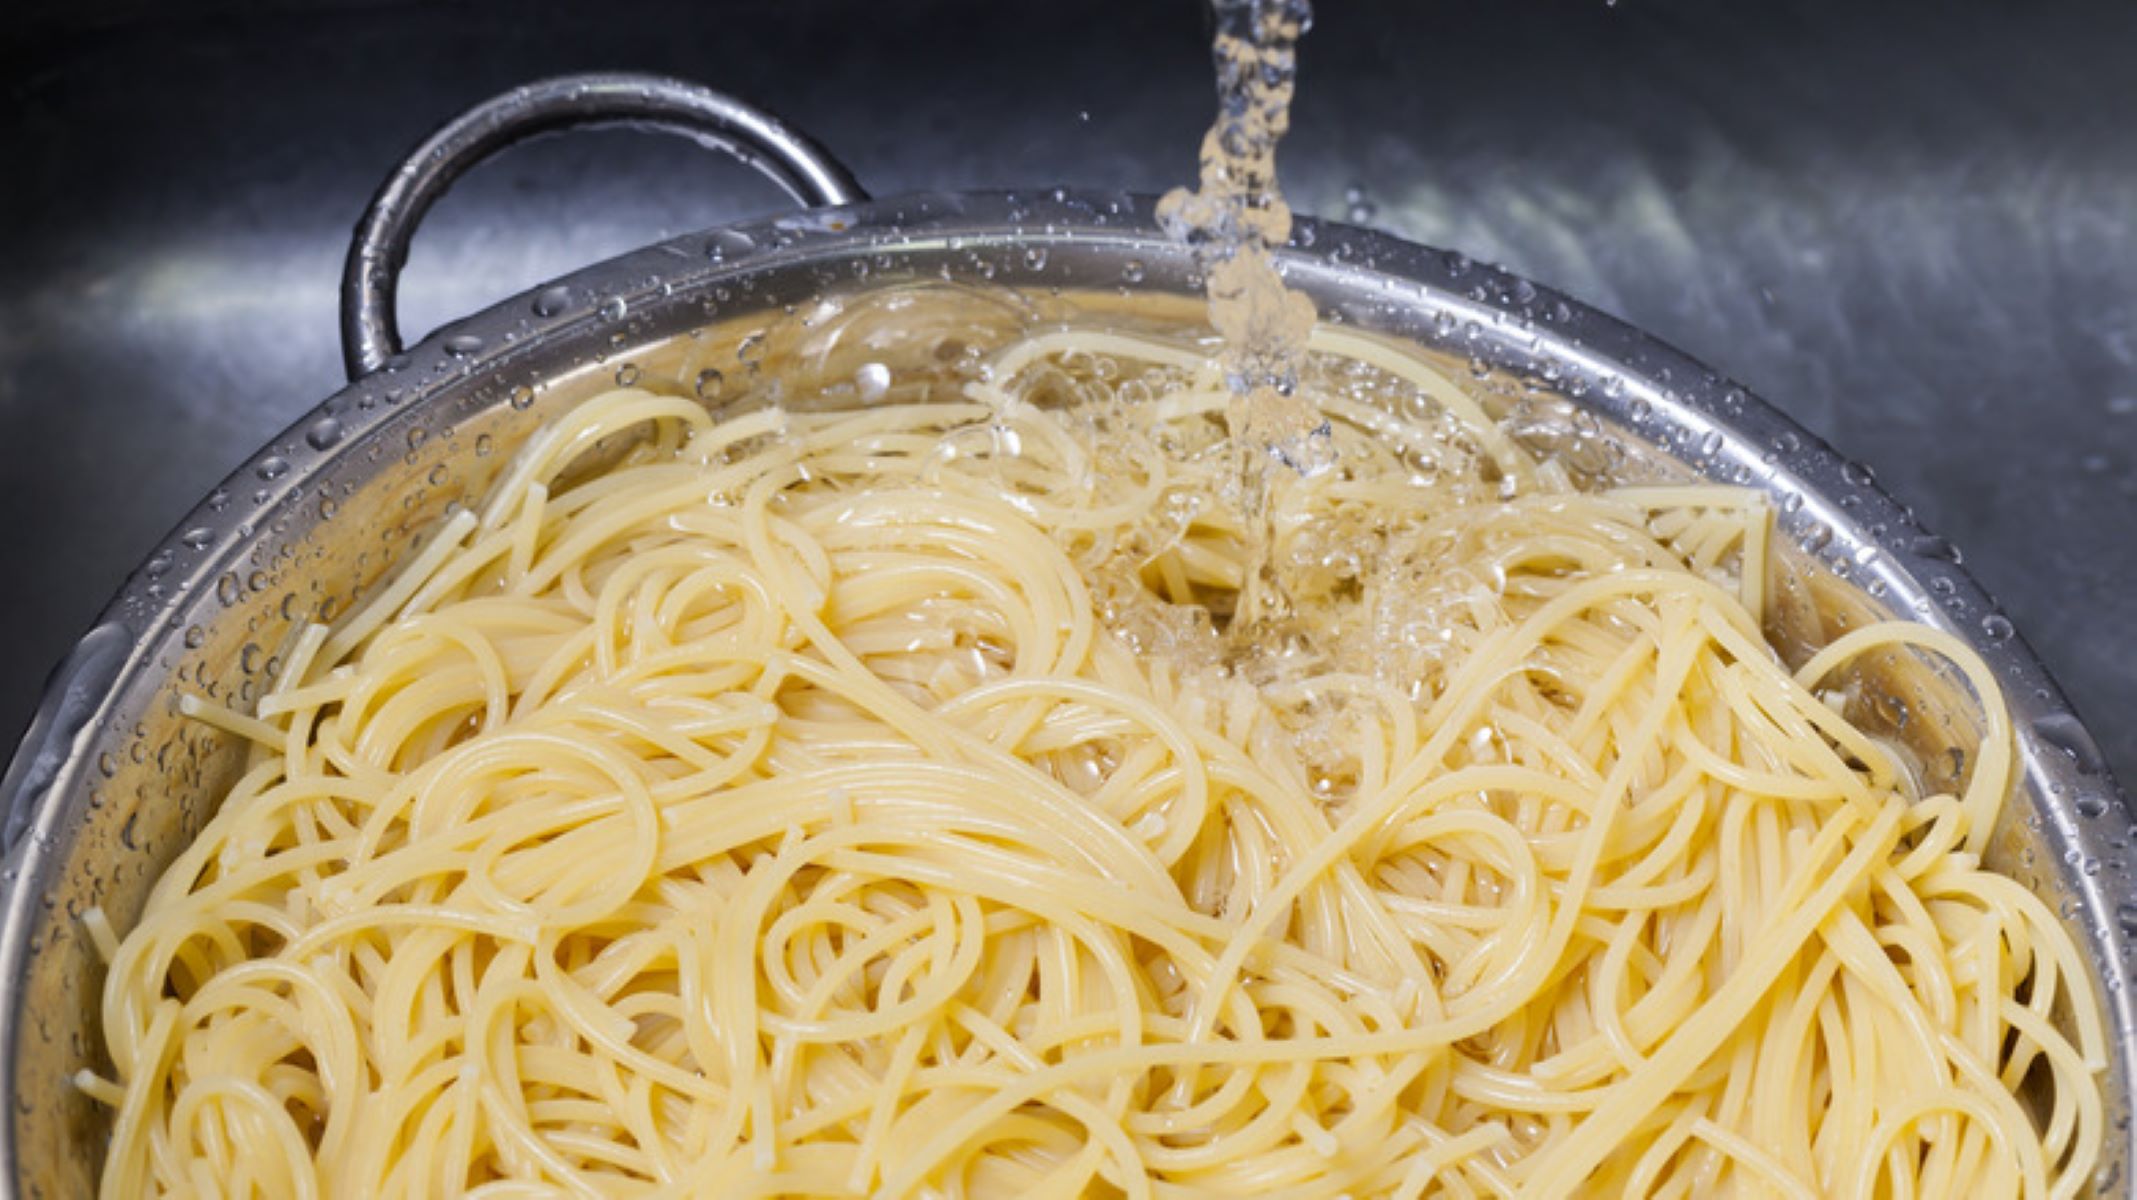 How To Strain Pasta Without A Strainer